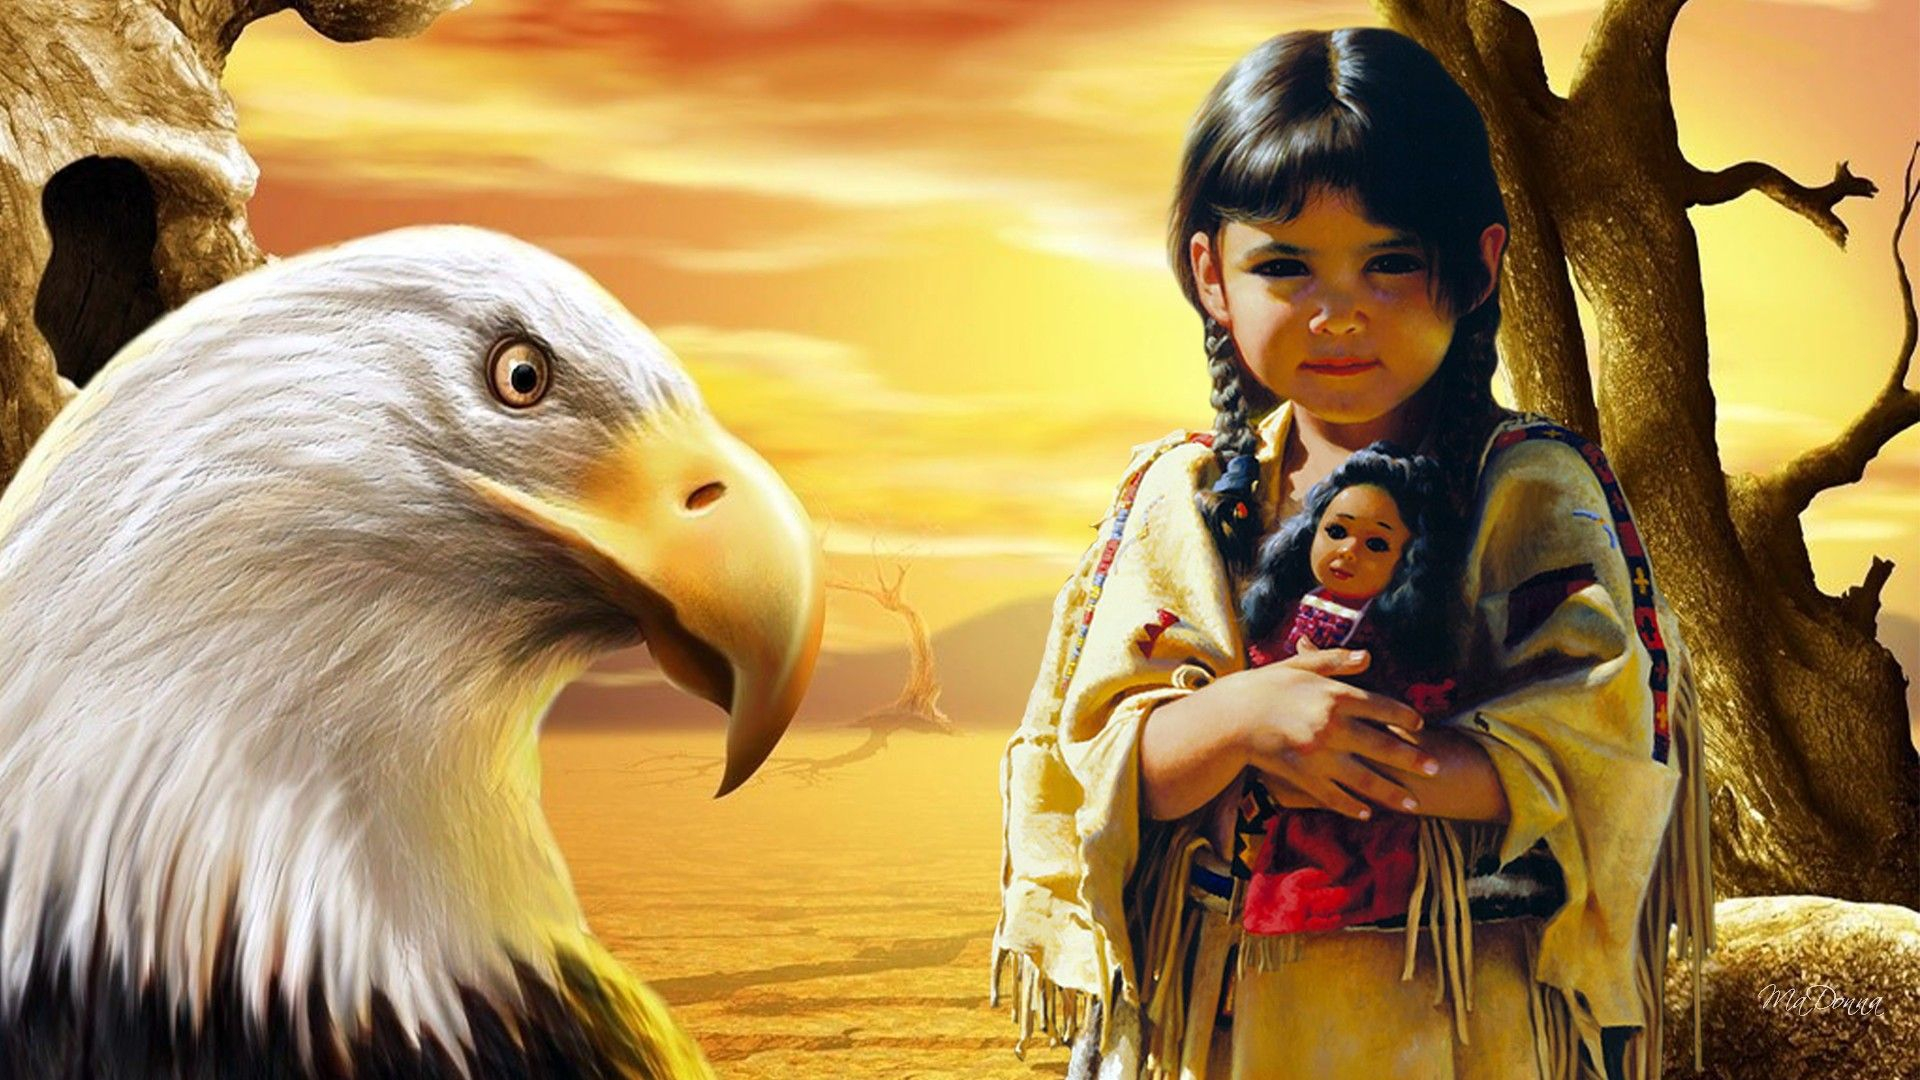 1920x1080 Native American Indian Wallpaper | Native American Native Americans Wallpaper (3417&acirc;&#128;&brvbar; | Native american children, Native american wallpaper, Native american images